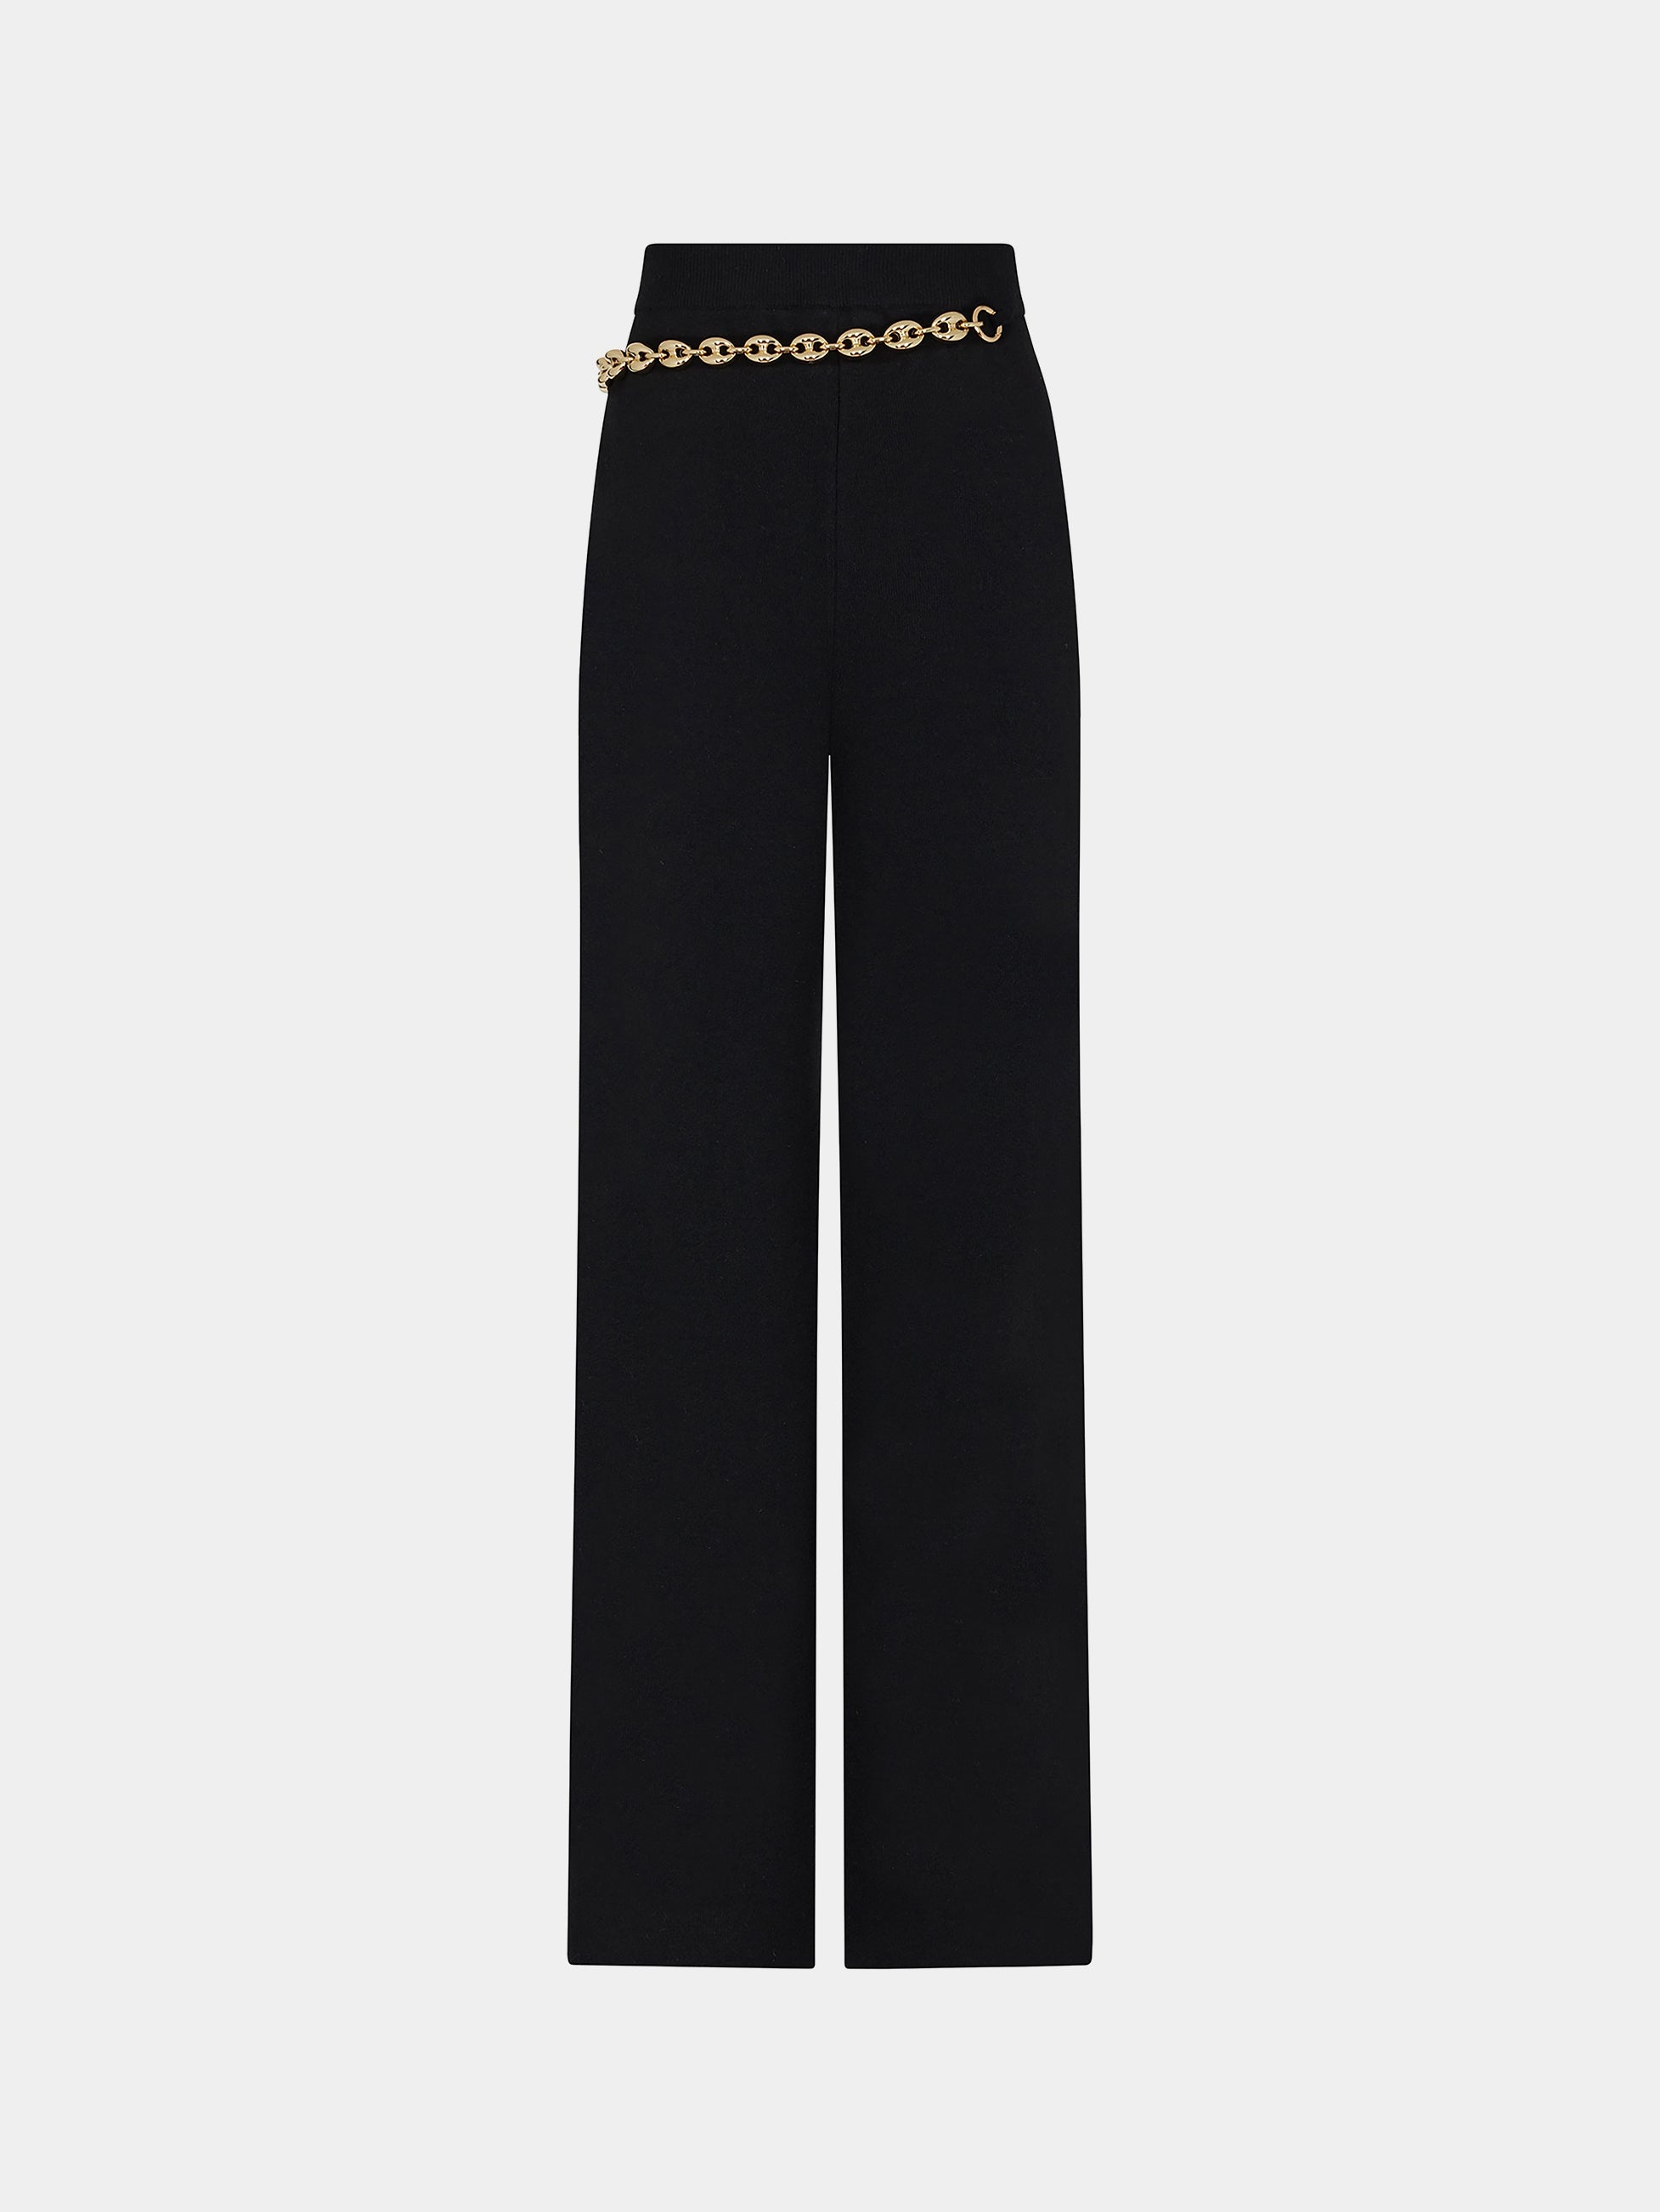 BLACK TROUSERS WITH EIGHT GOLD LINKS CHAIN - 6